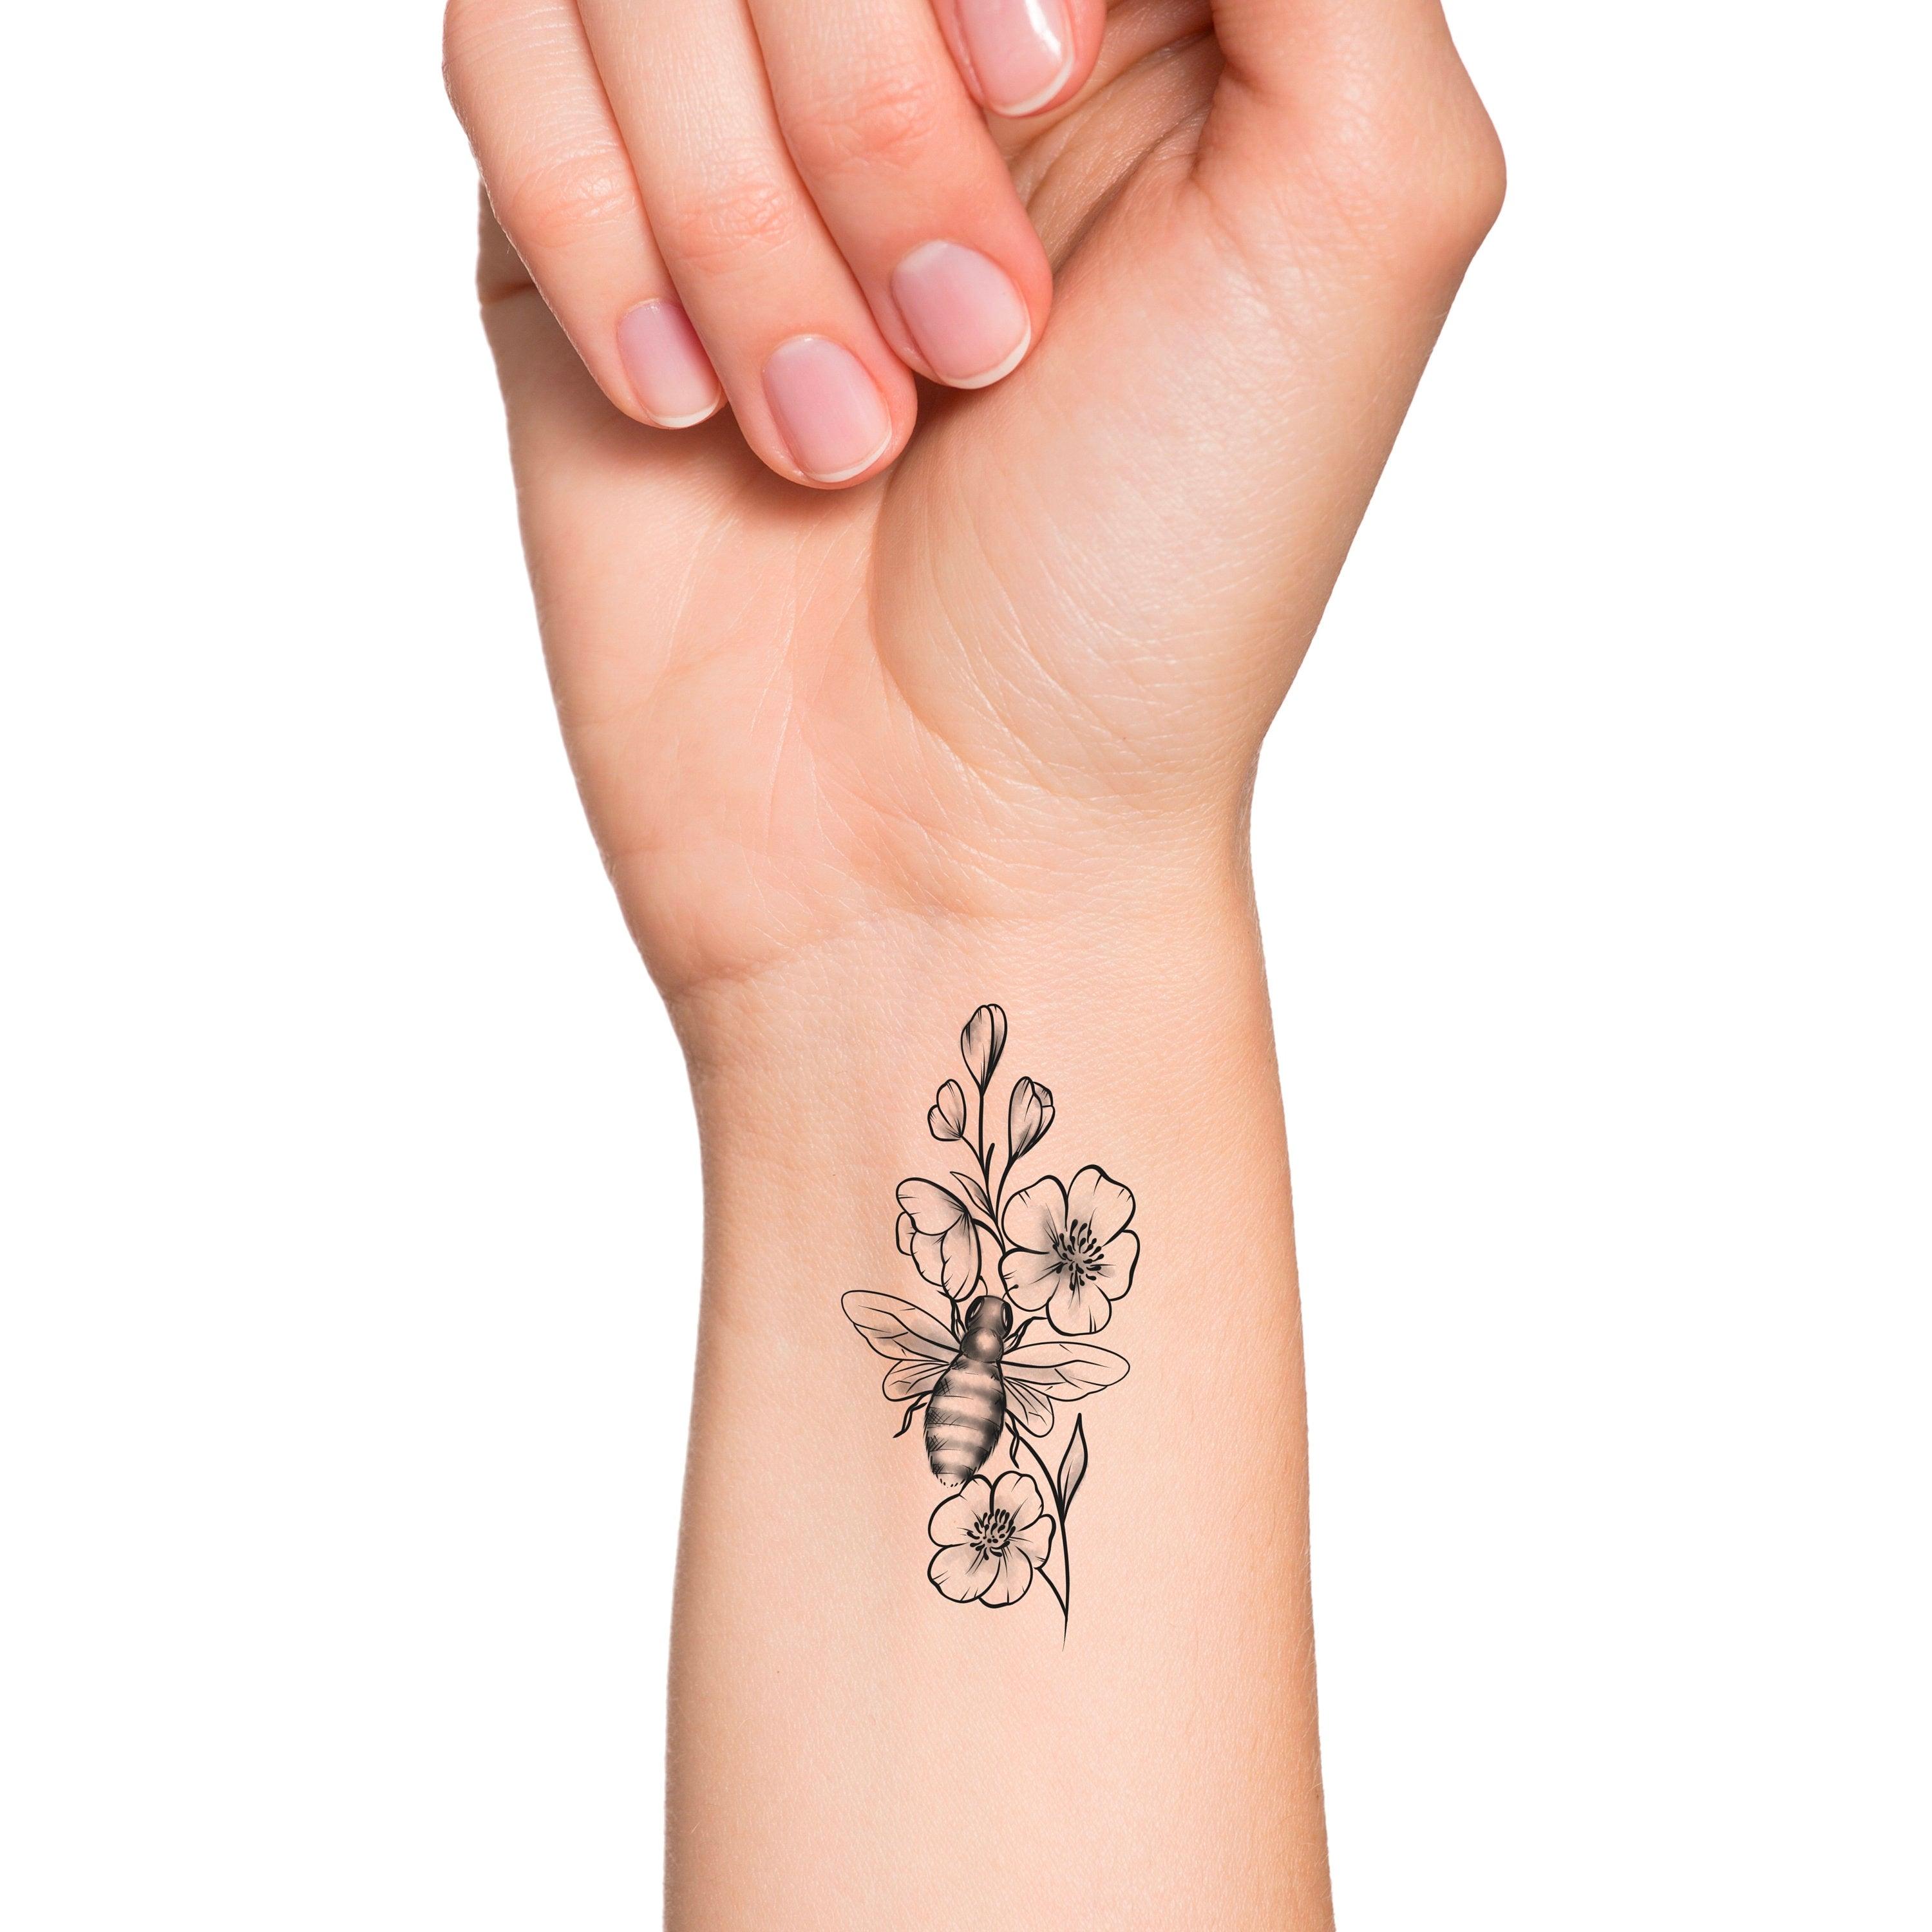 Bumble Bee Floral Temporary Tattoo  Bee Tattoo  Floral  Etsy